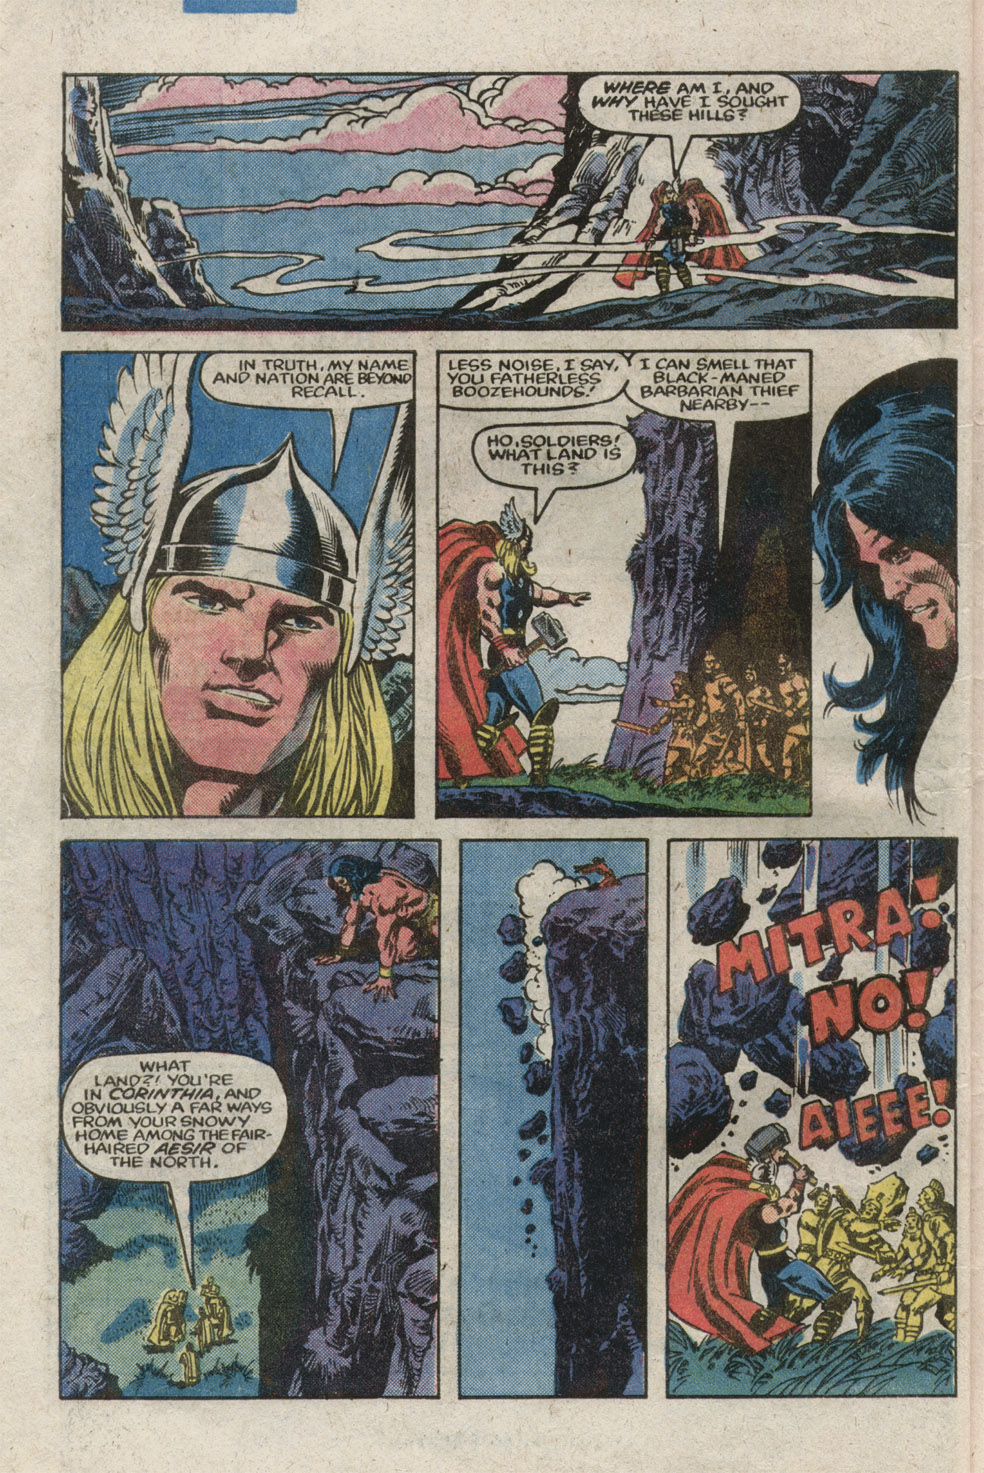 What If? (1977) issue 39 - Thor battled conan - Page 8